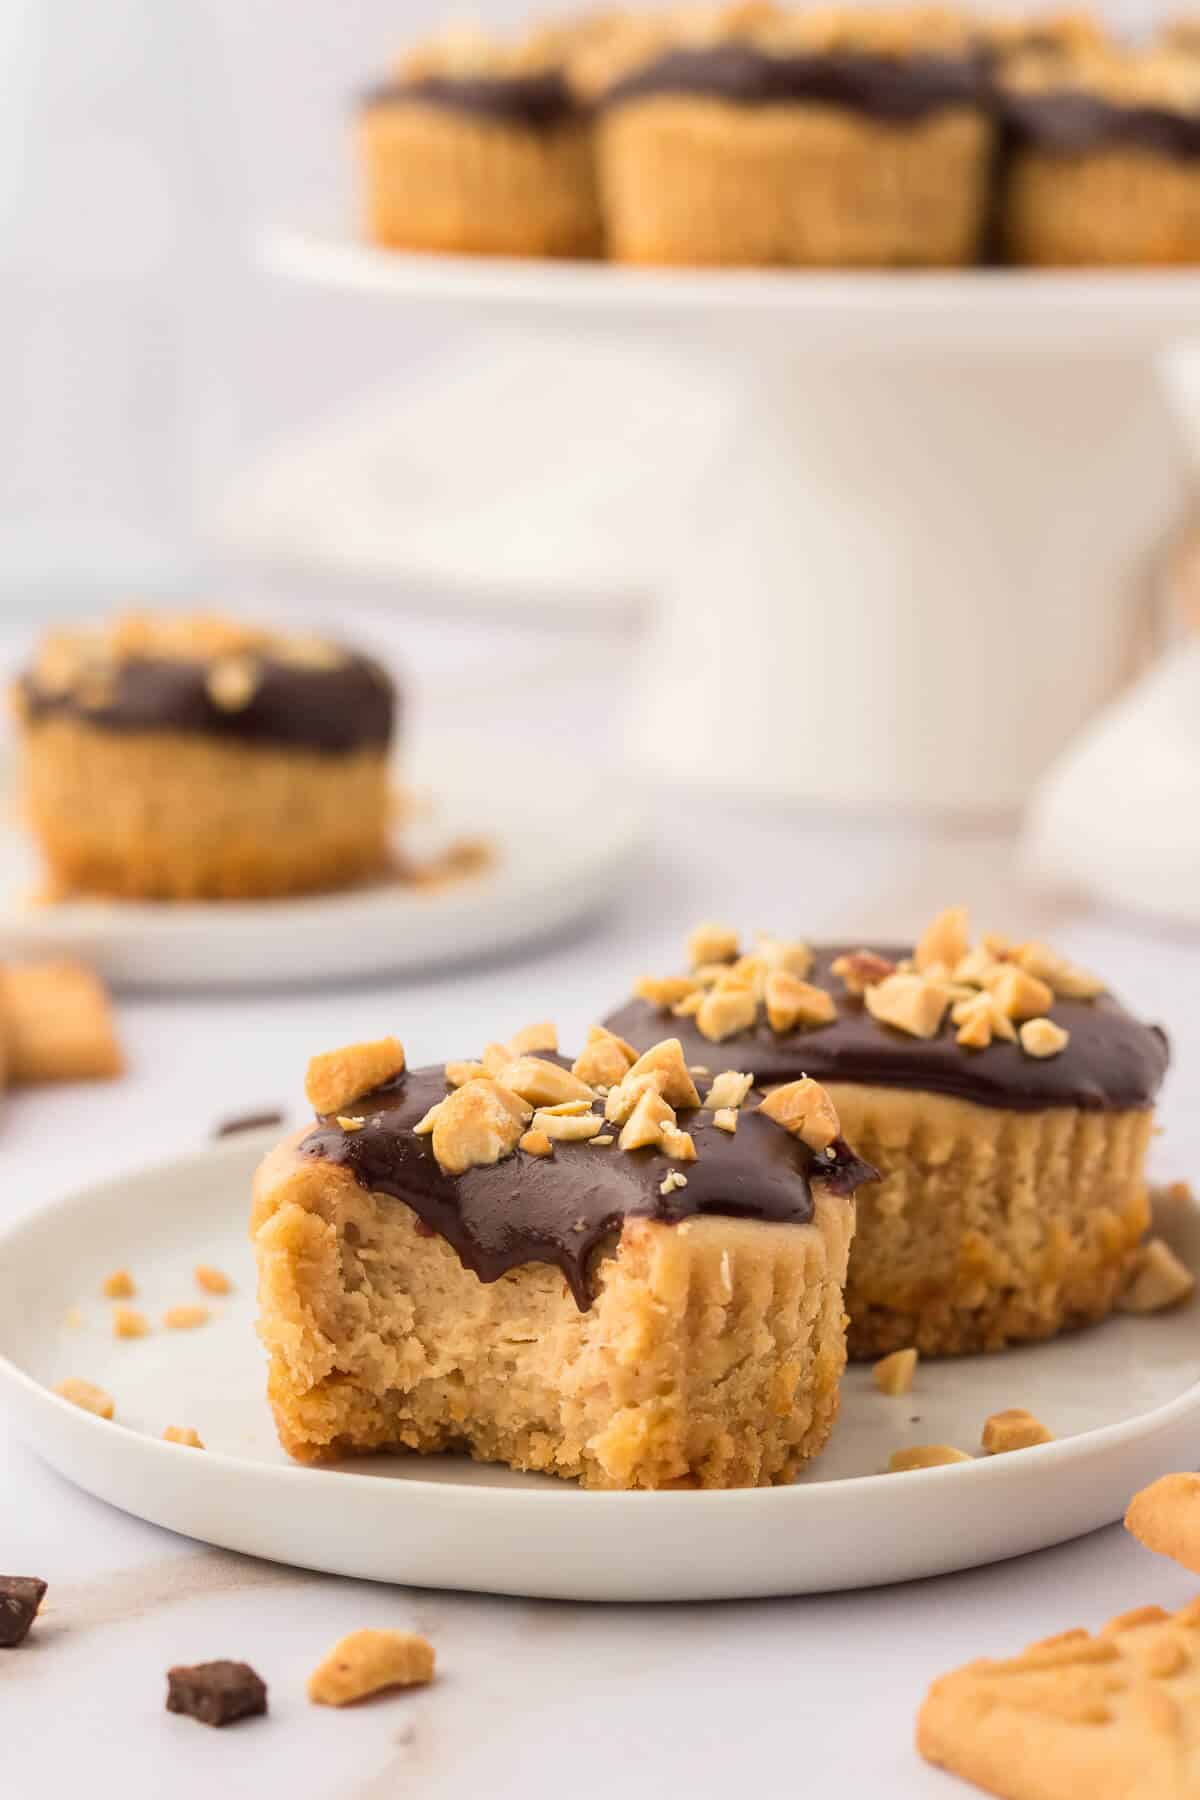 Two mini peanut butter cheesecakes on a plate.